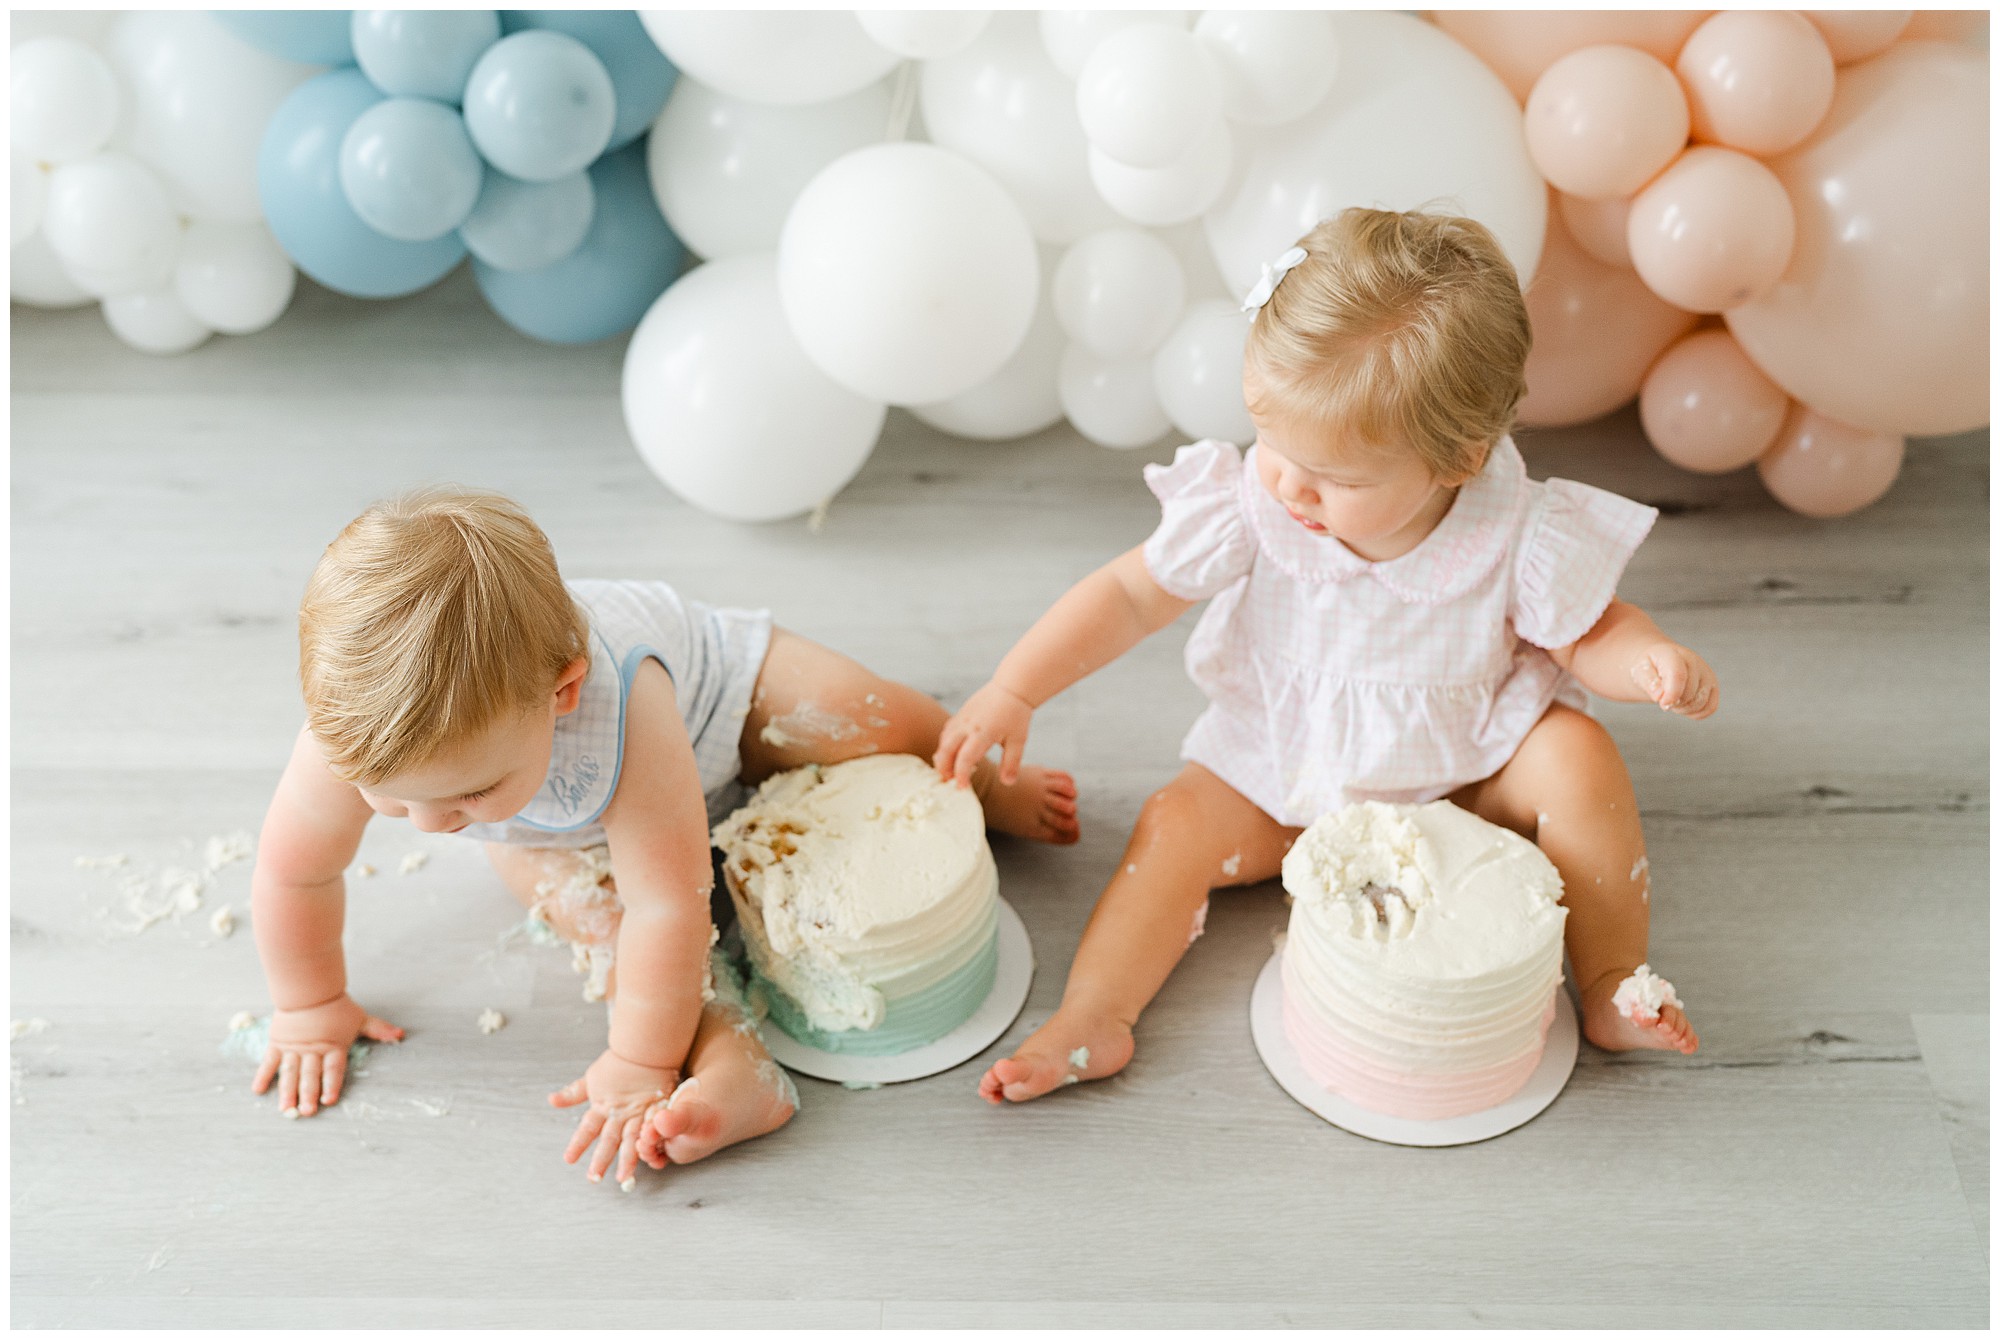 A twin boy and girl digging into cakes for an Atlanta cake smash for twins photo session.